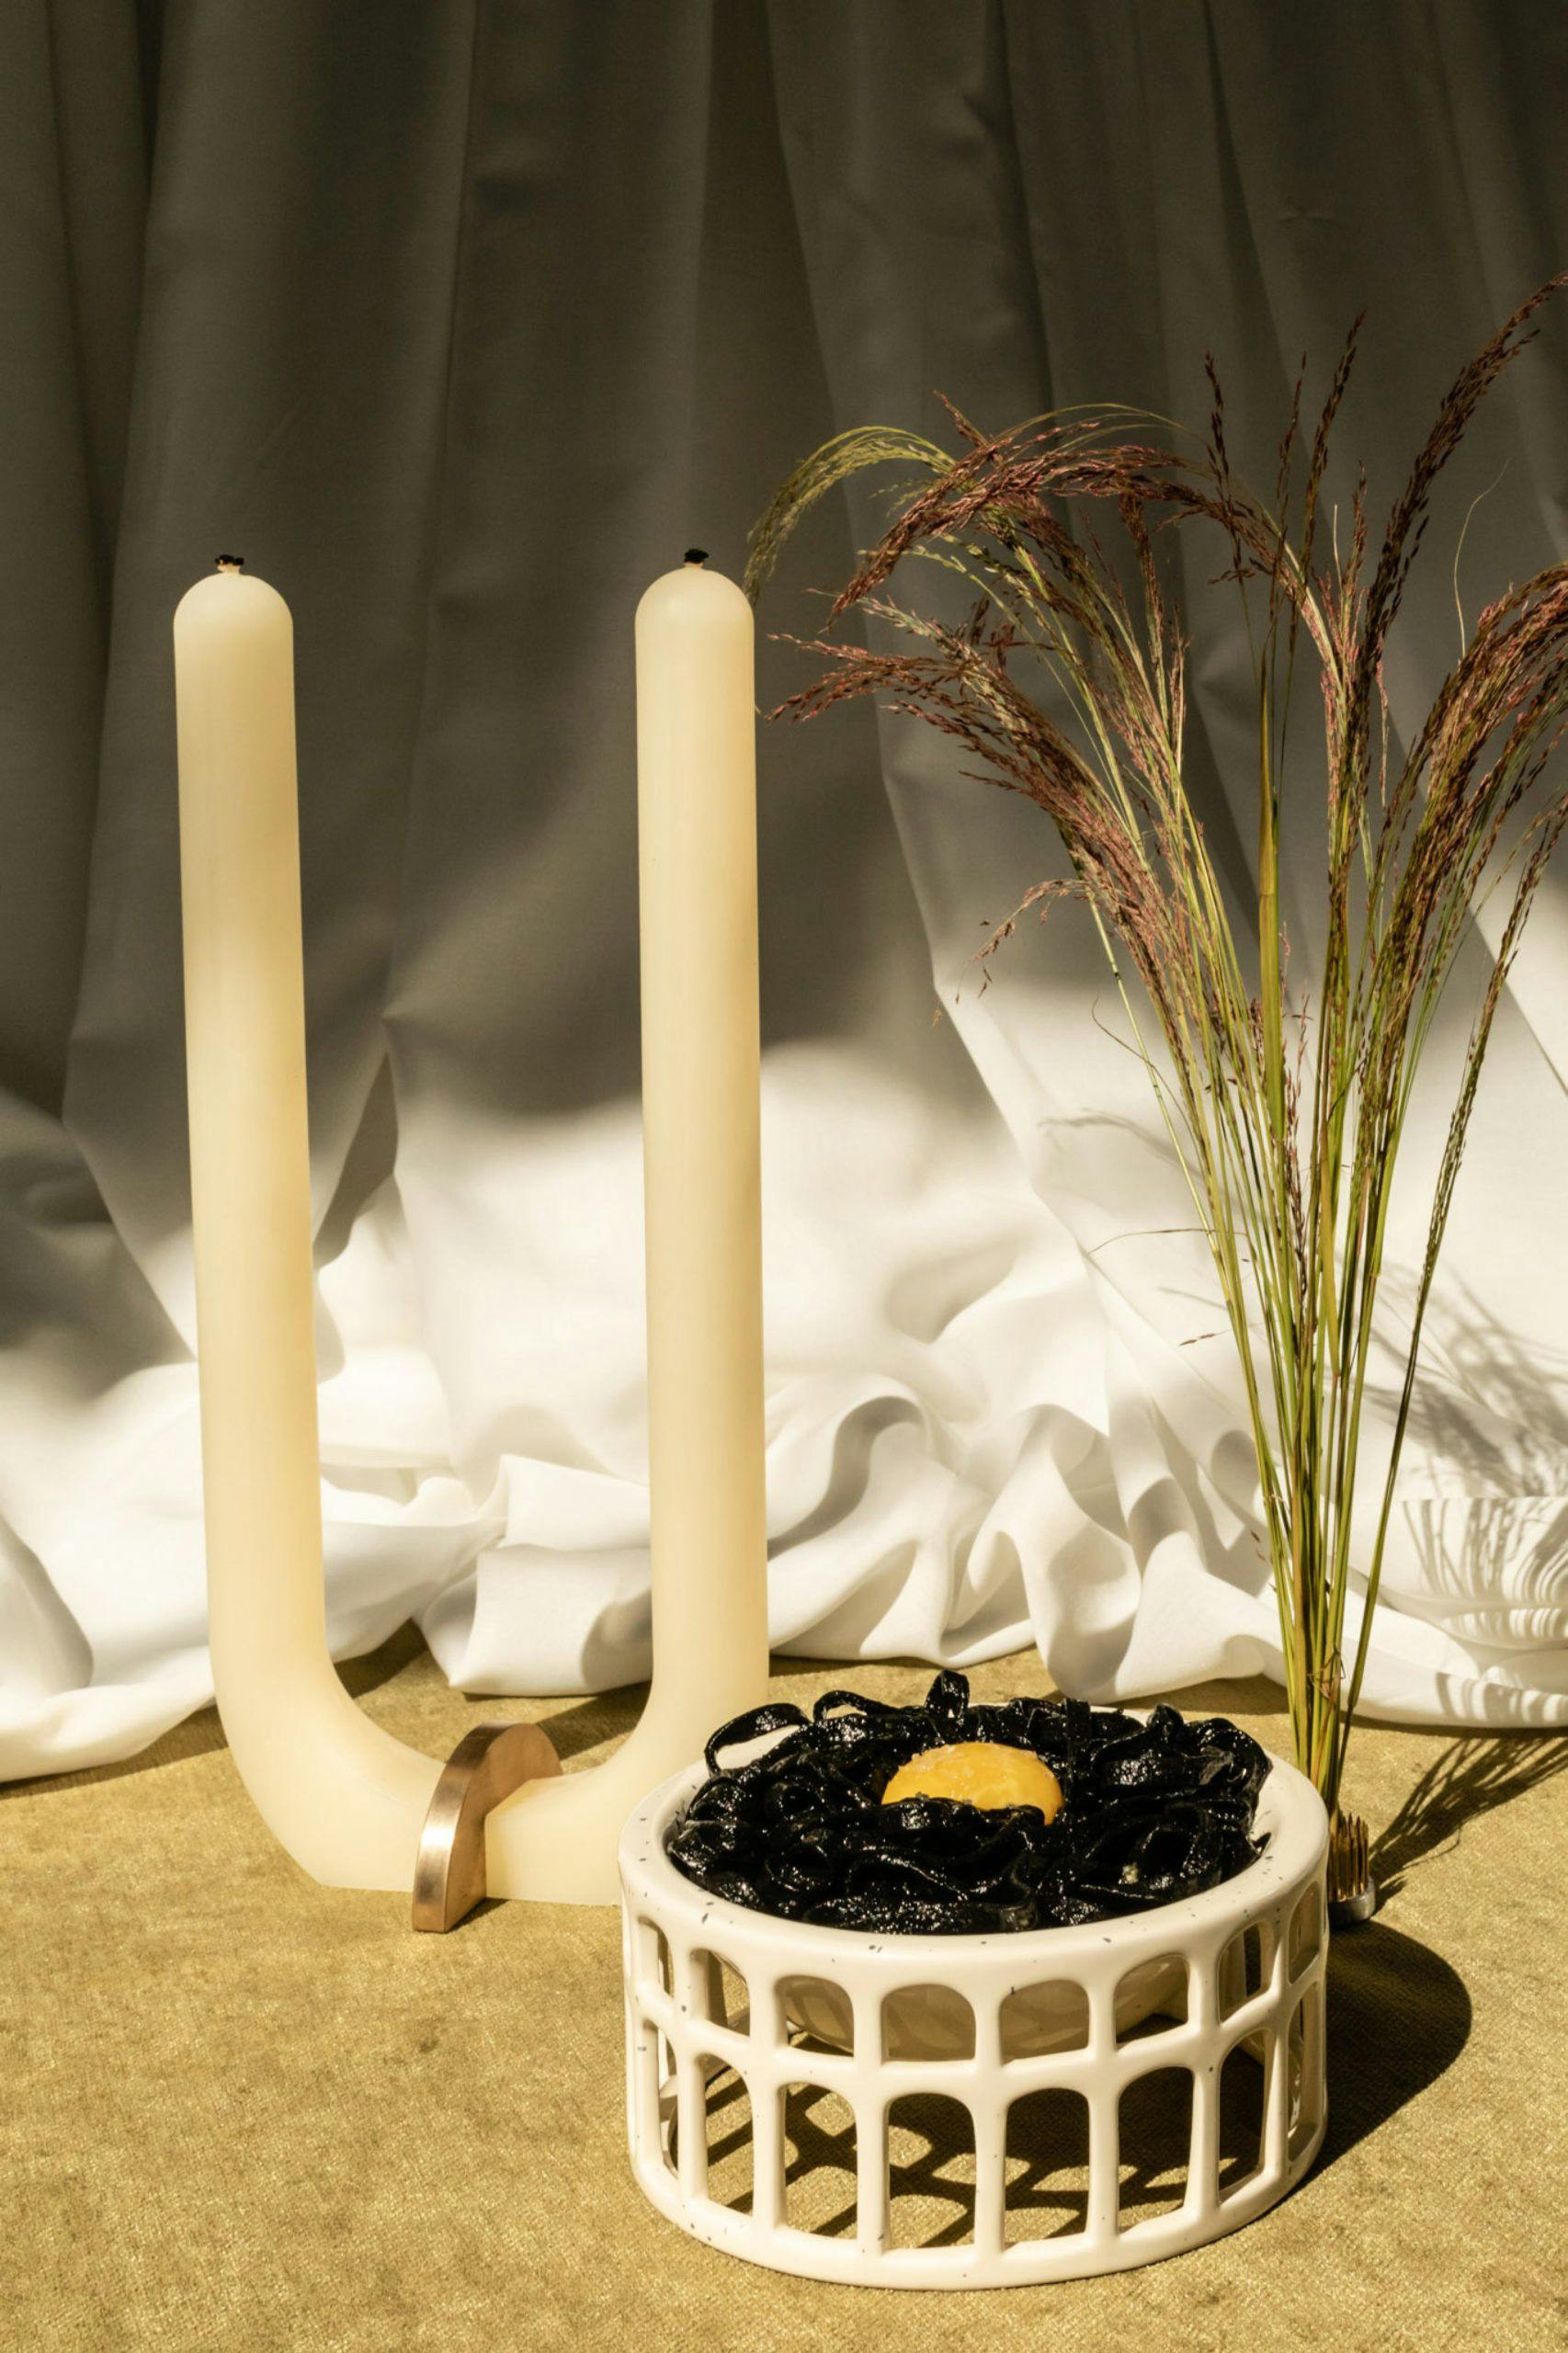 Candle and plant in front of a white curtain